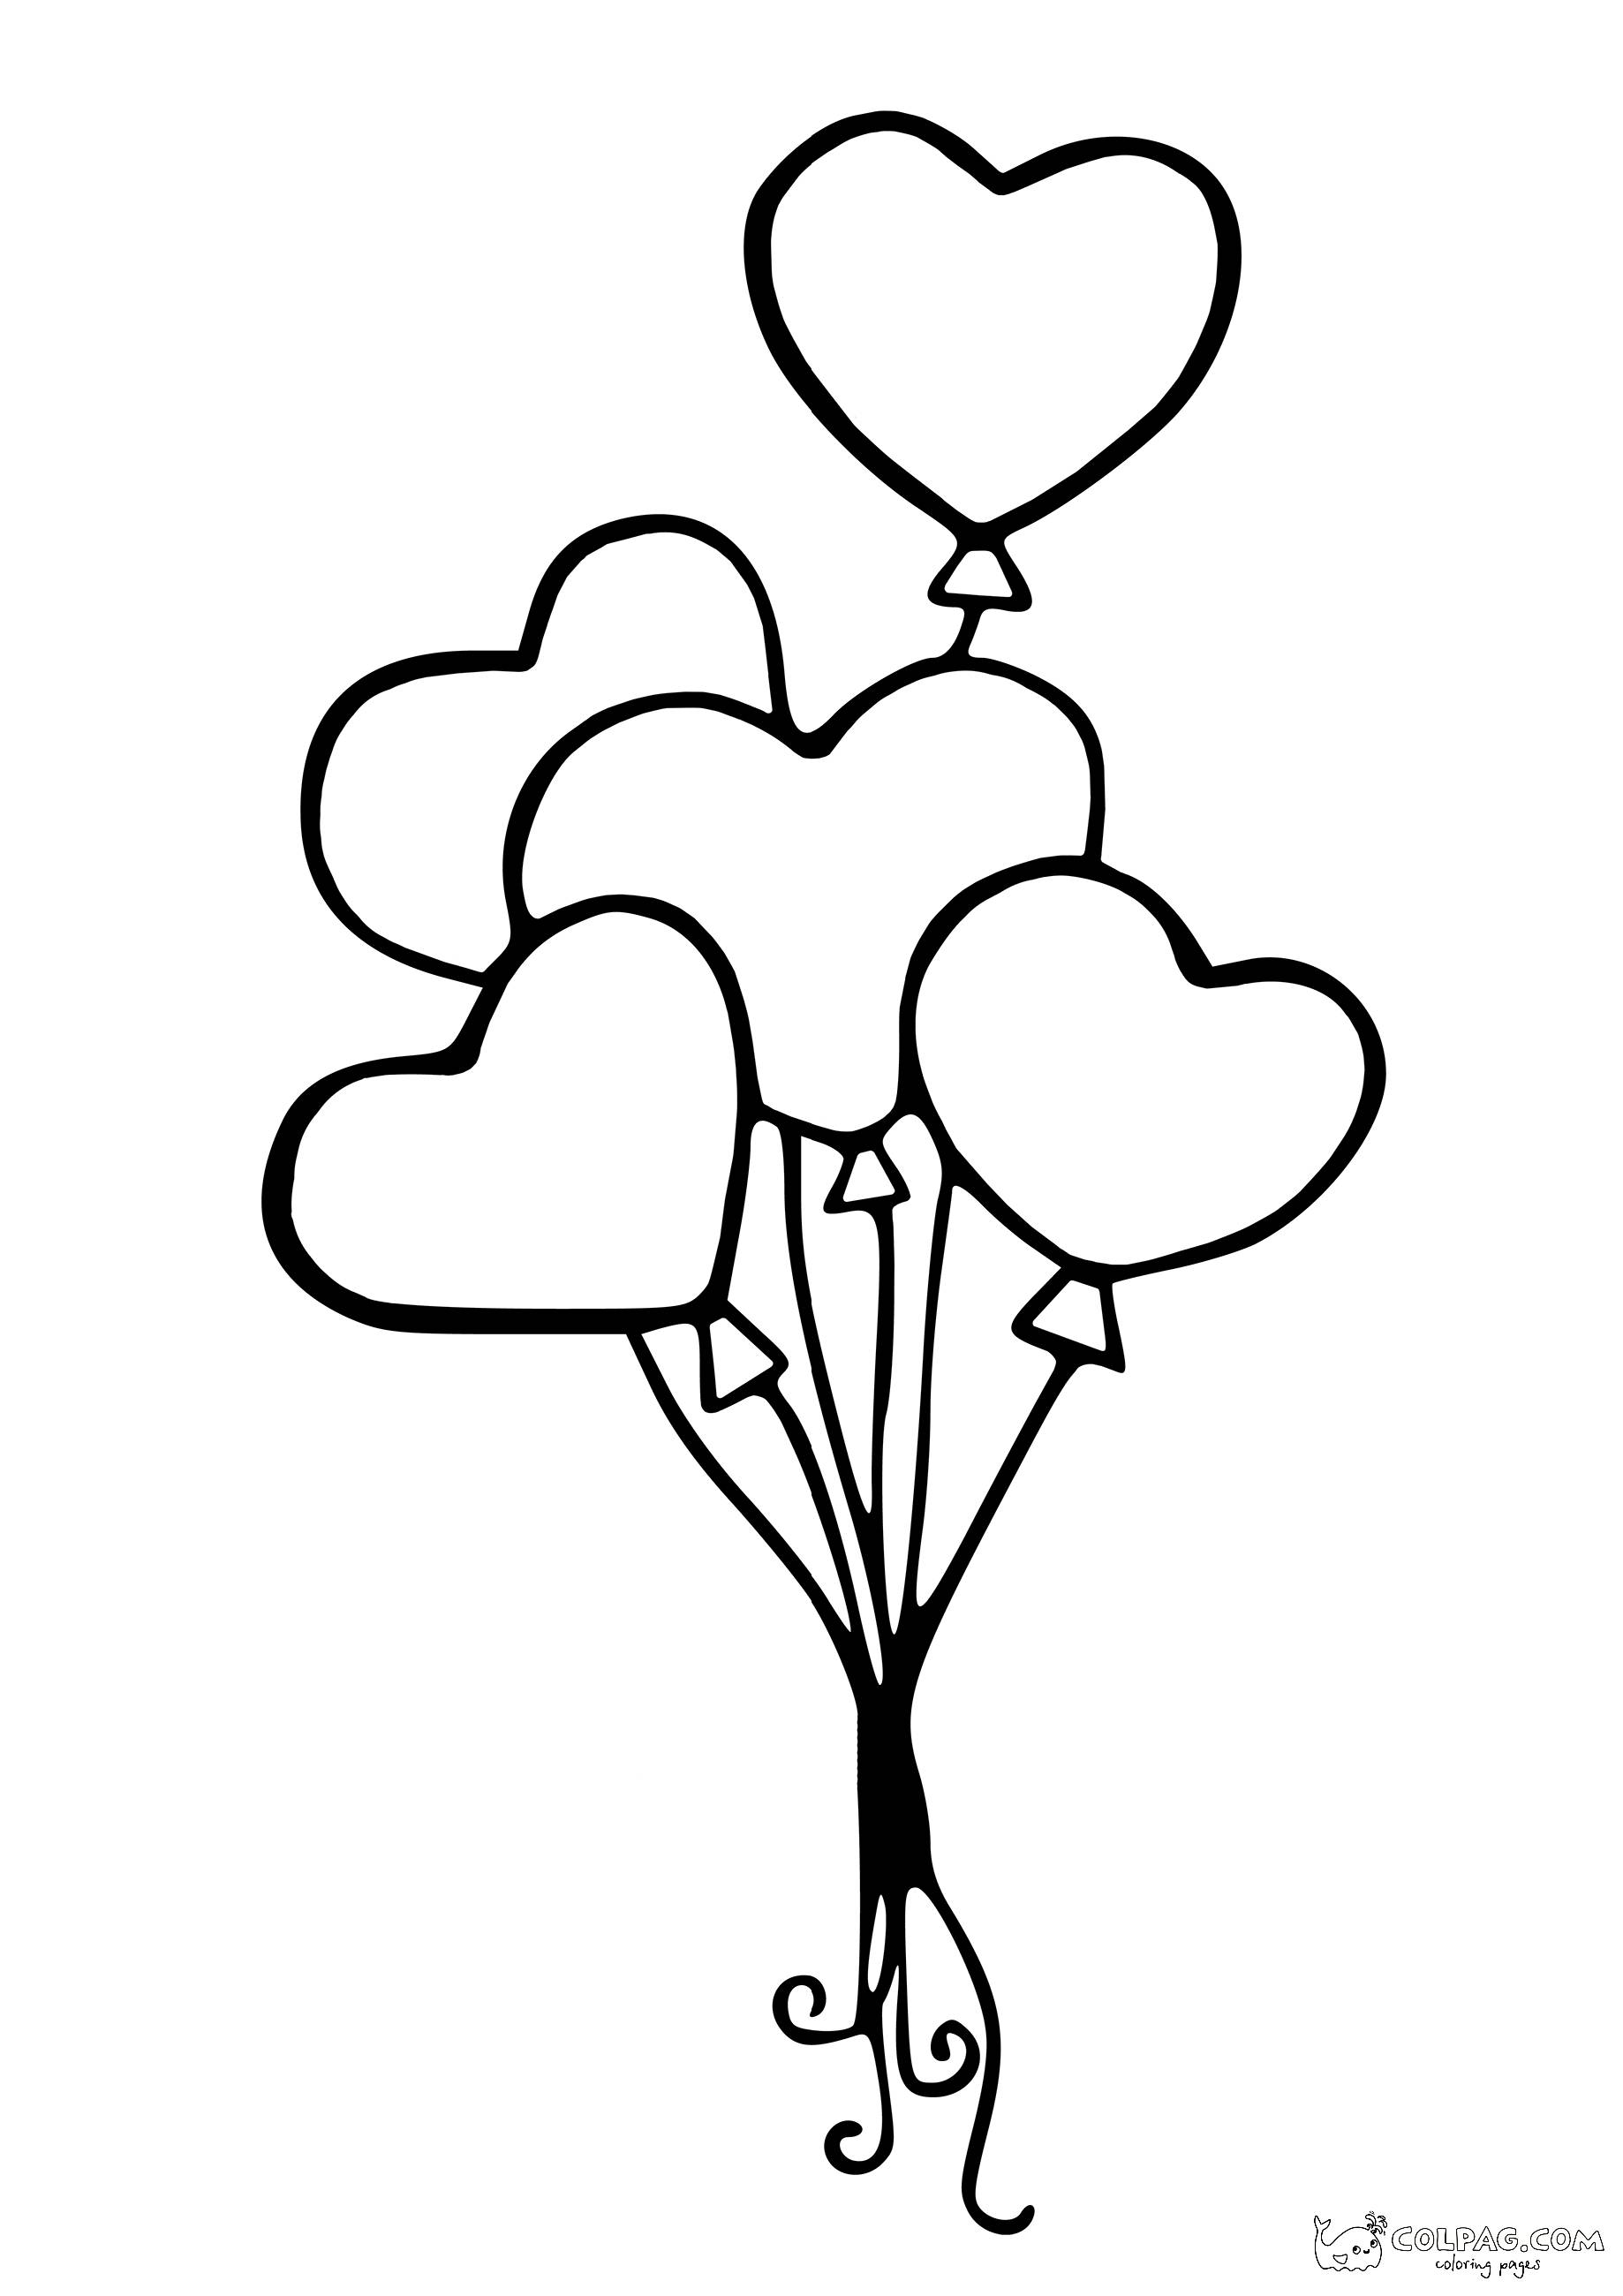 21-cute-heart-baloons-coloring-page-colpag-21